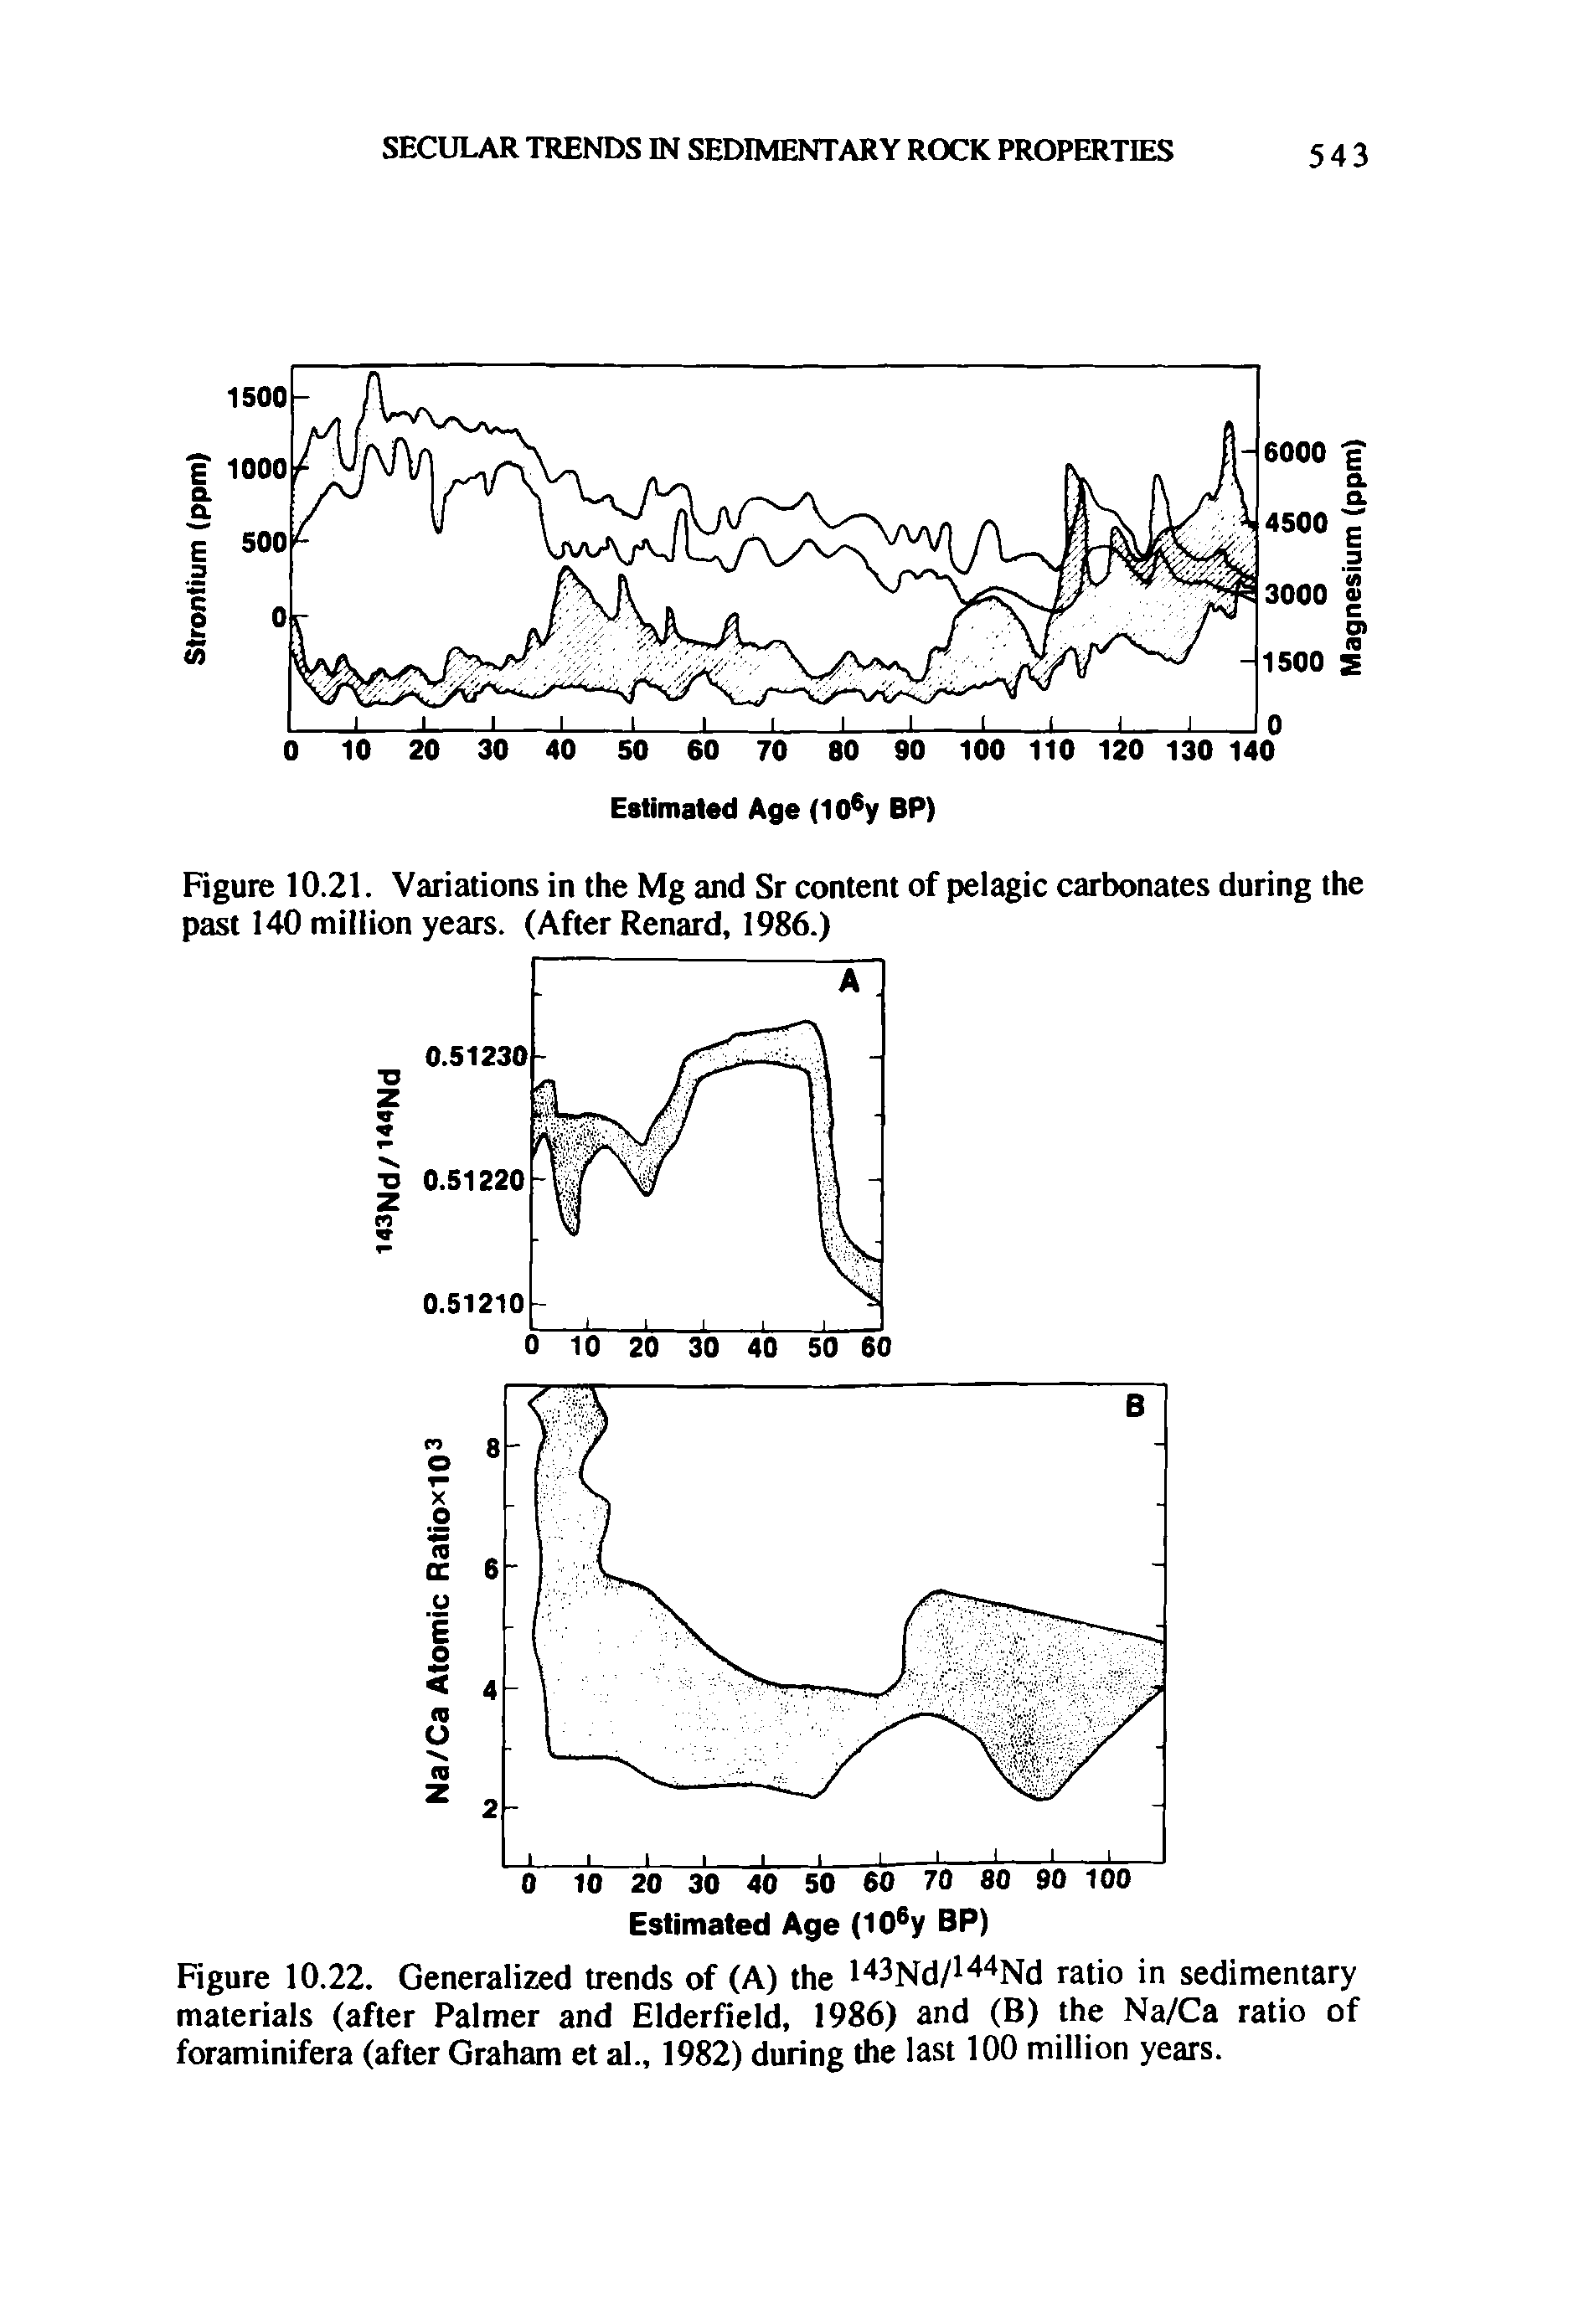 Figure 10.22. Generalized trends of (A) the 143Nd/144Nd ratio in sedimentary materials (after Palmer and Elderfield, 1986) and (B) the Na/Ca ratio of foraminifera (after Graham et al., 1982) during the last 100 million years.